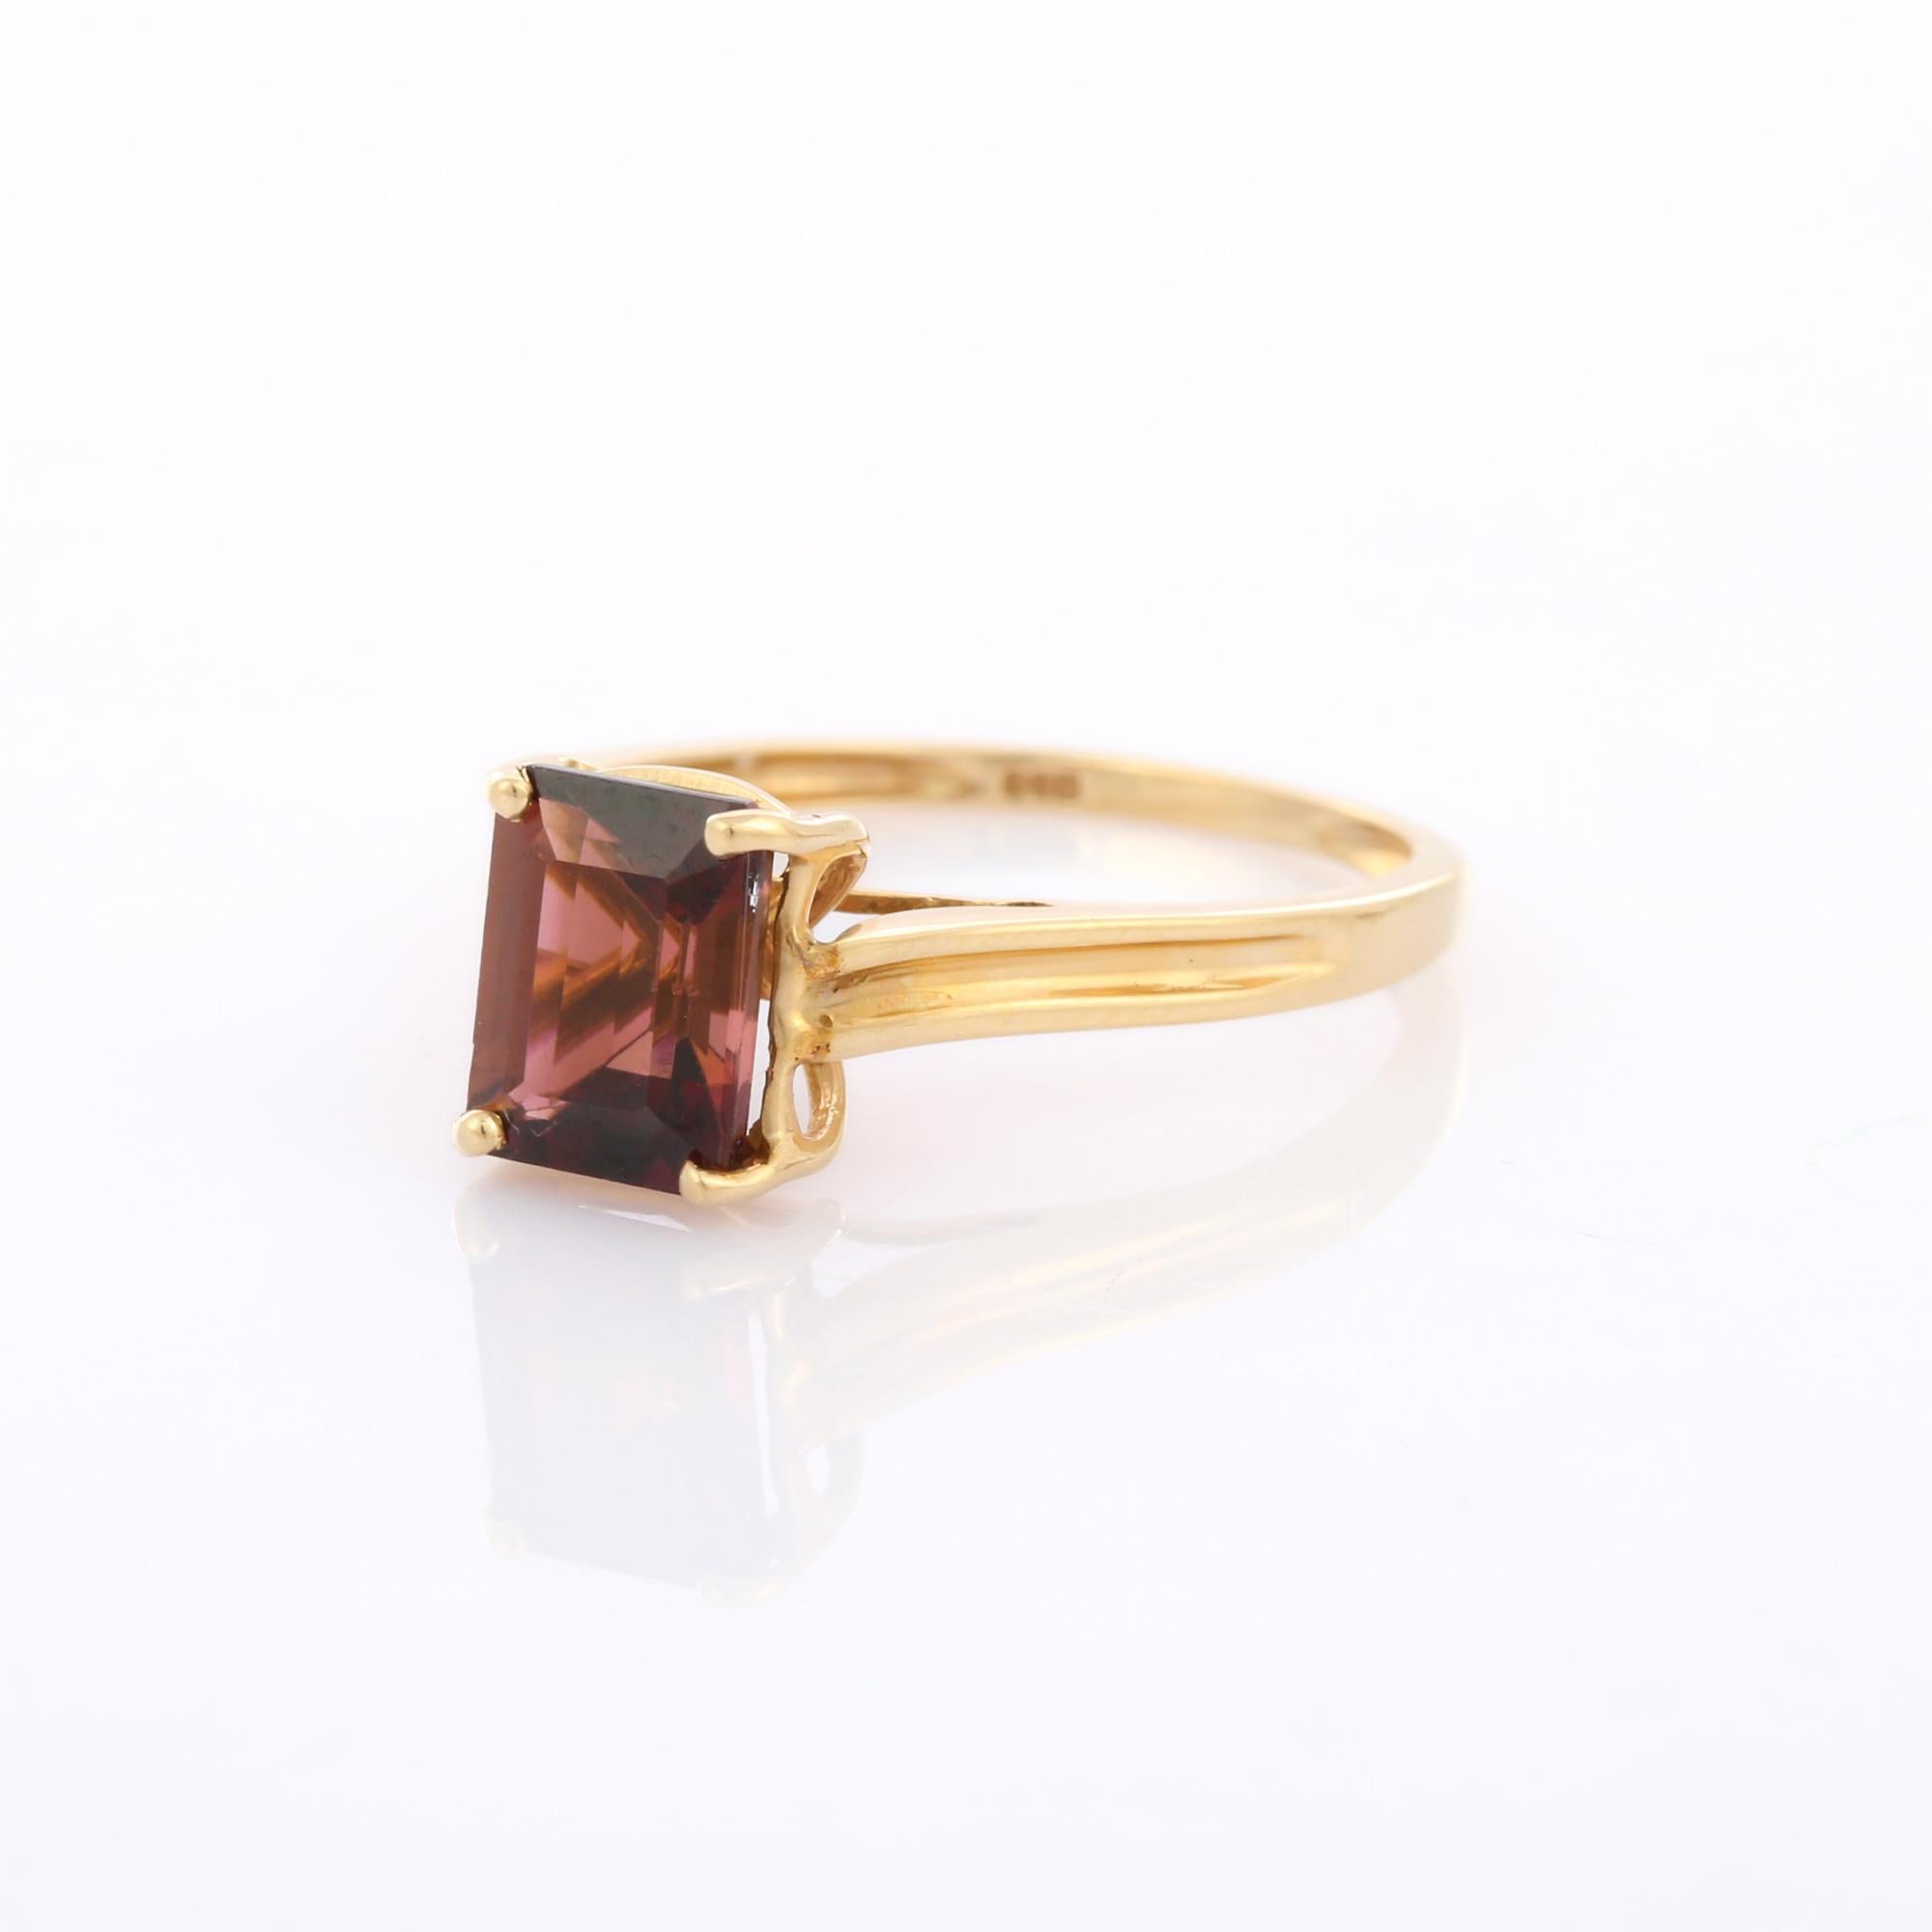 For Sale:  Octagon Cut Tourmaline Solitaire Ring in 14K Yellow Gold 3